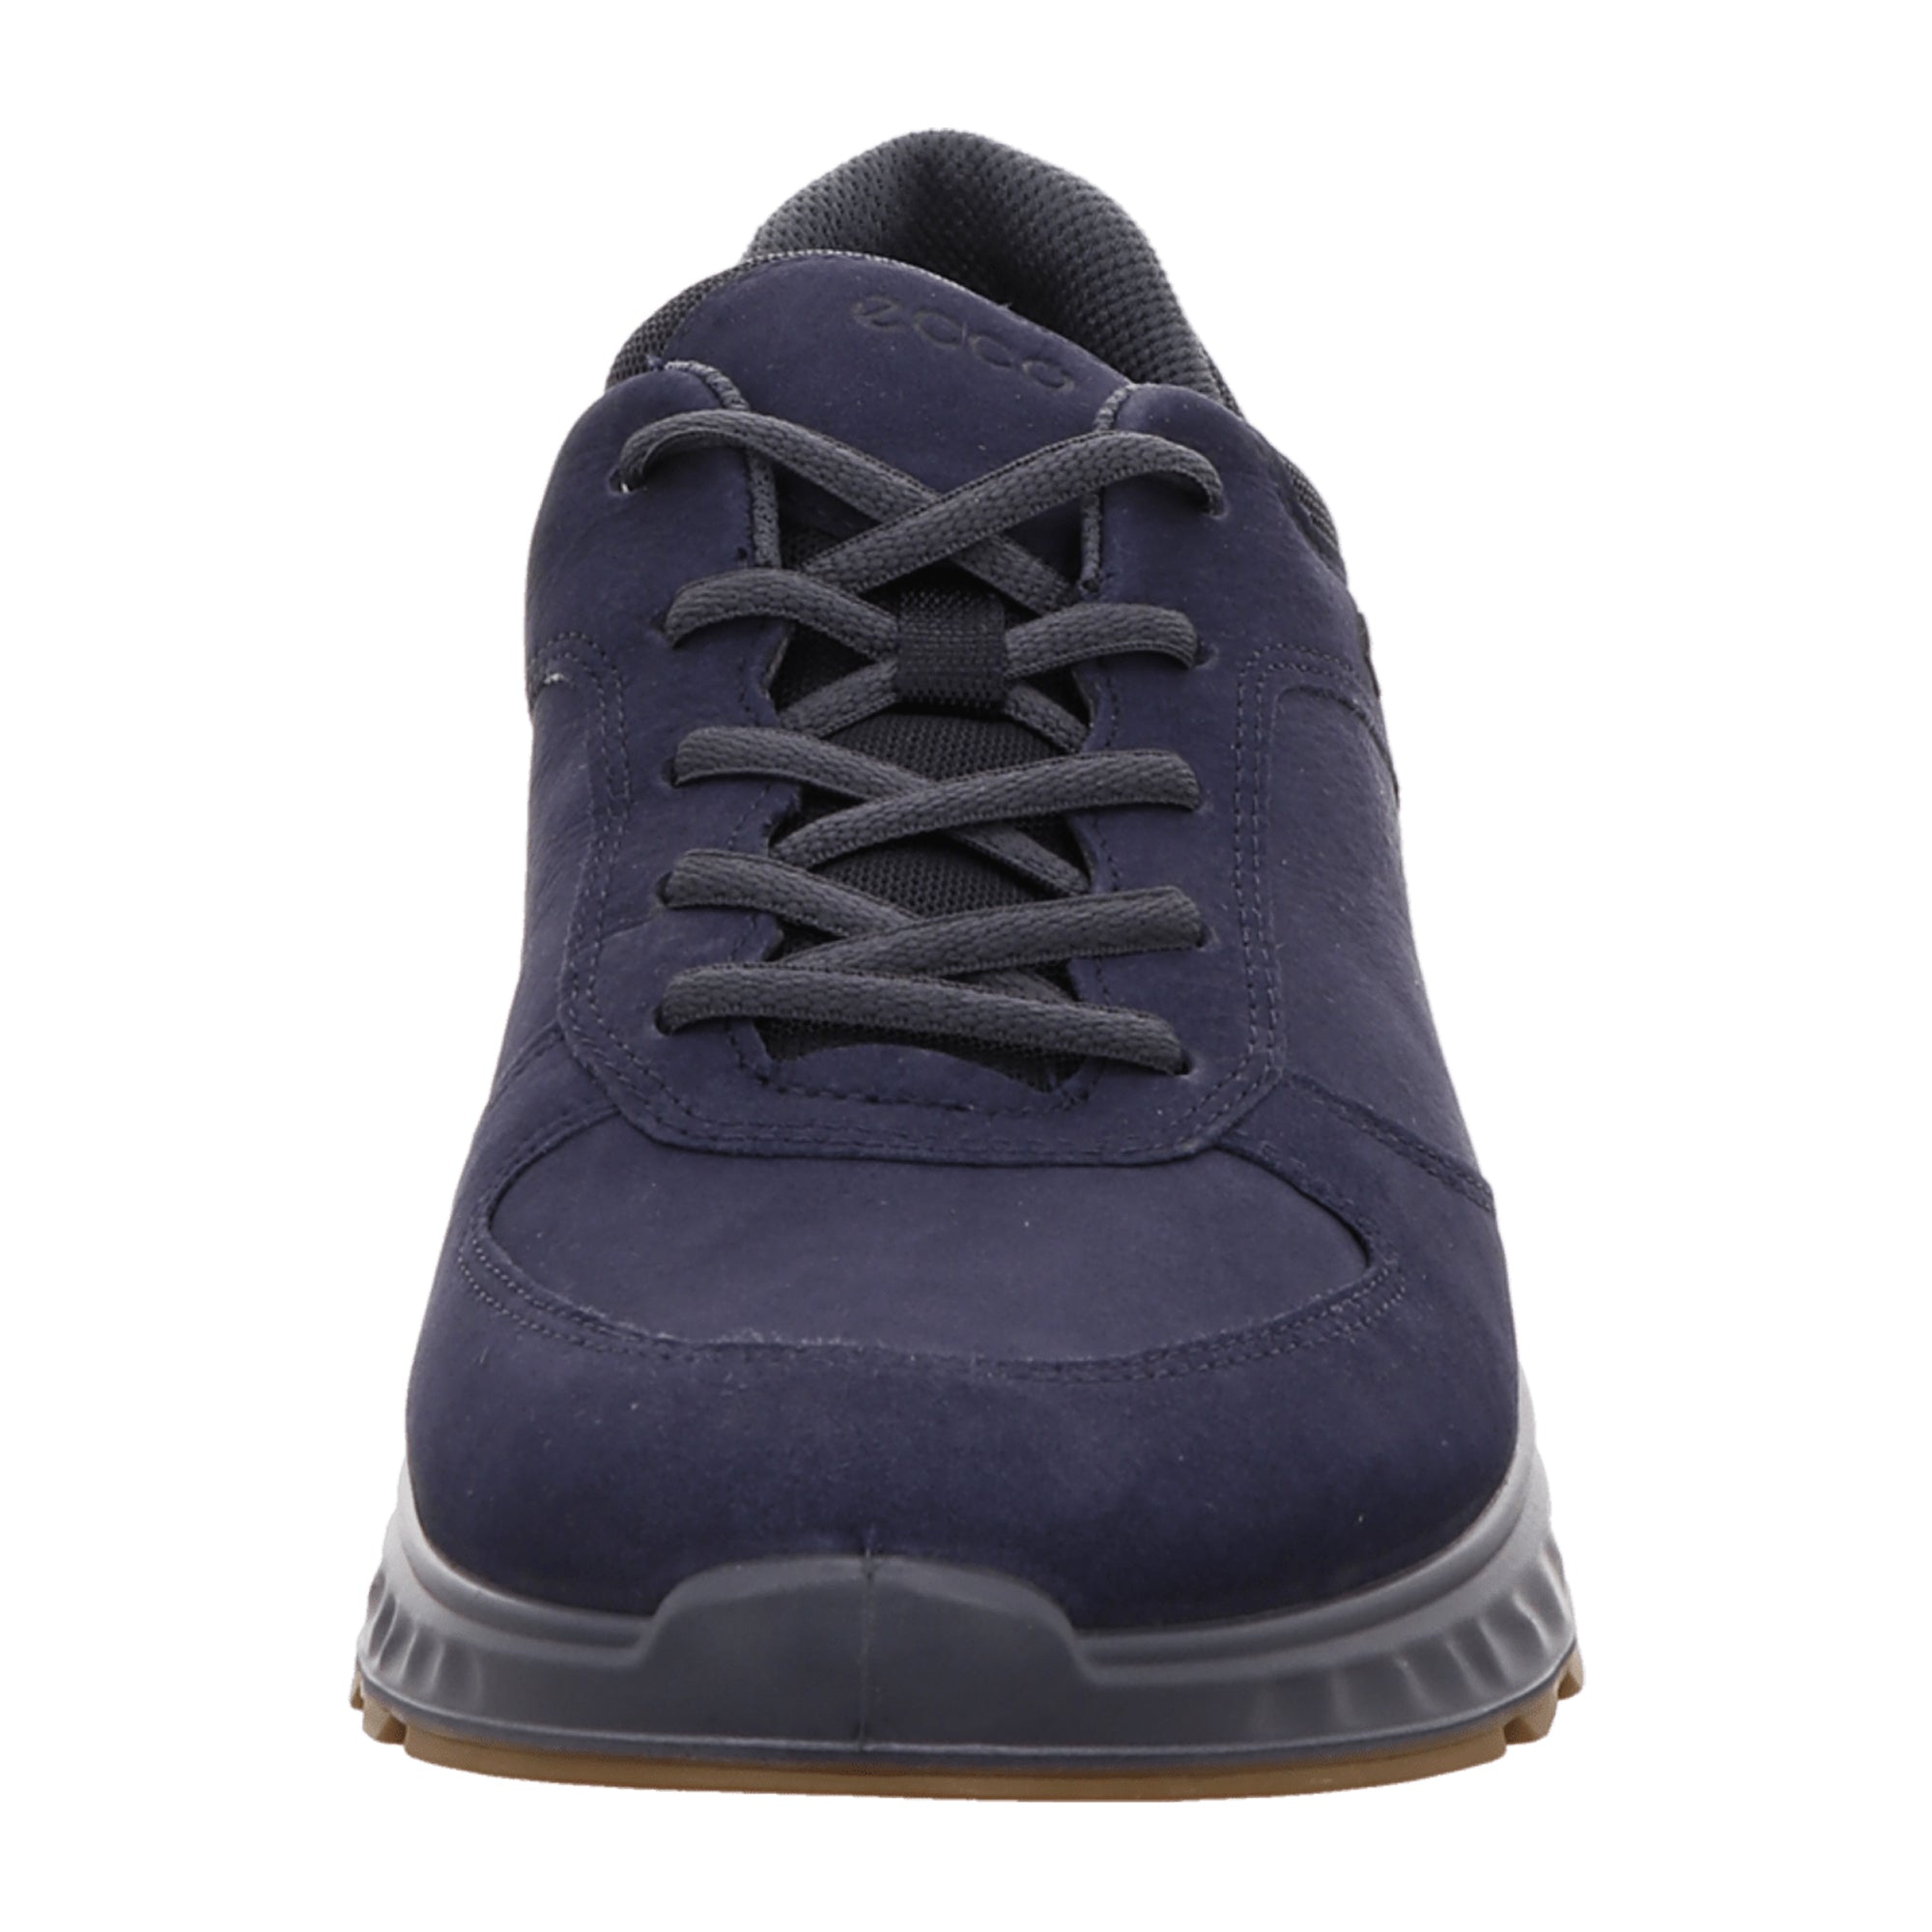 Ecco Men's Outdoor Shoes - Durable & Stylish in Blue